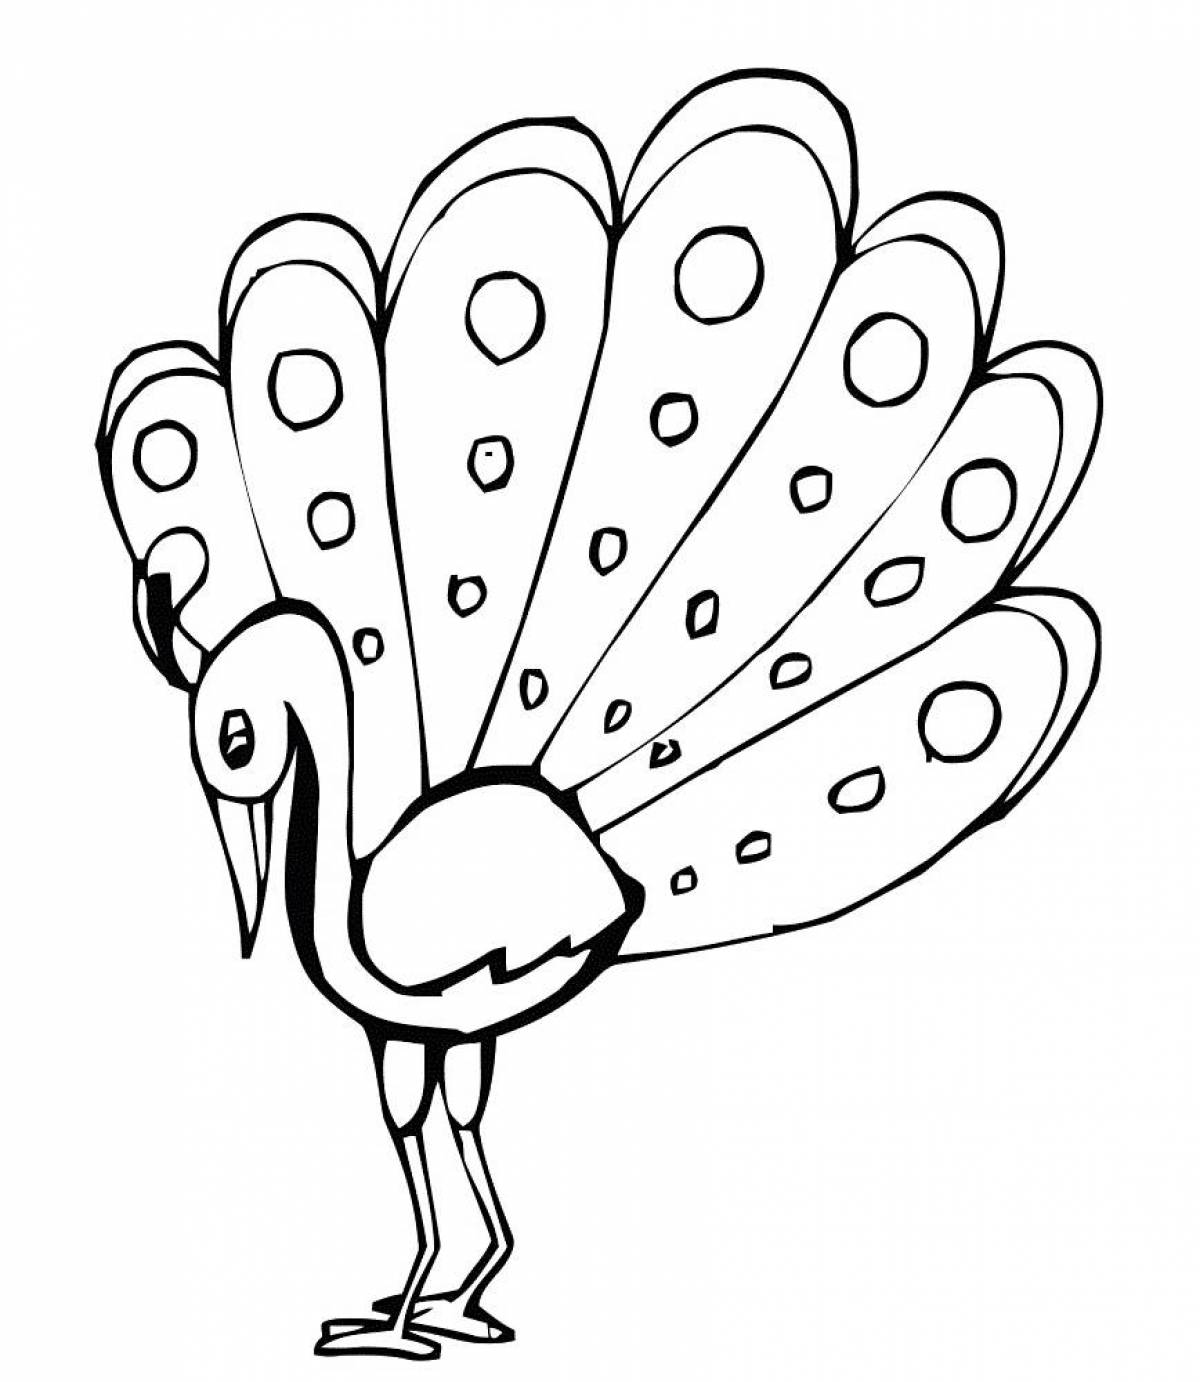 Adorable peacock coloring page for kids